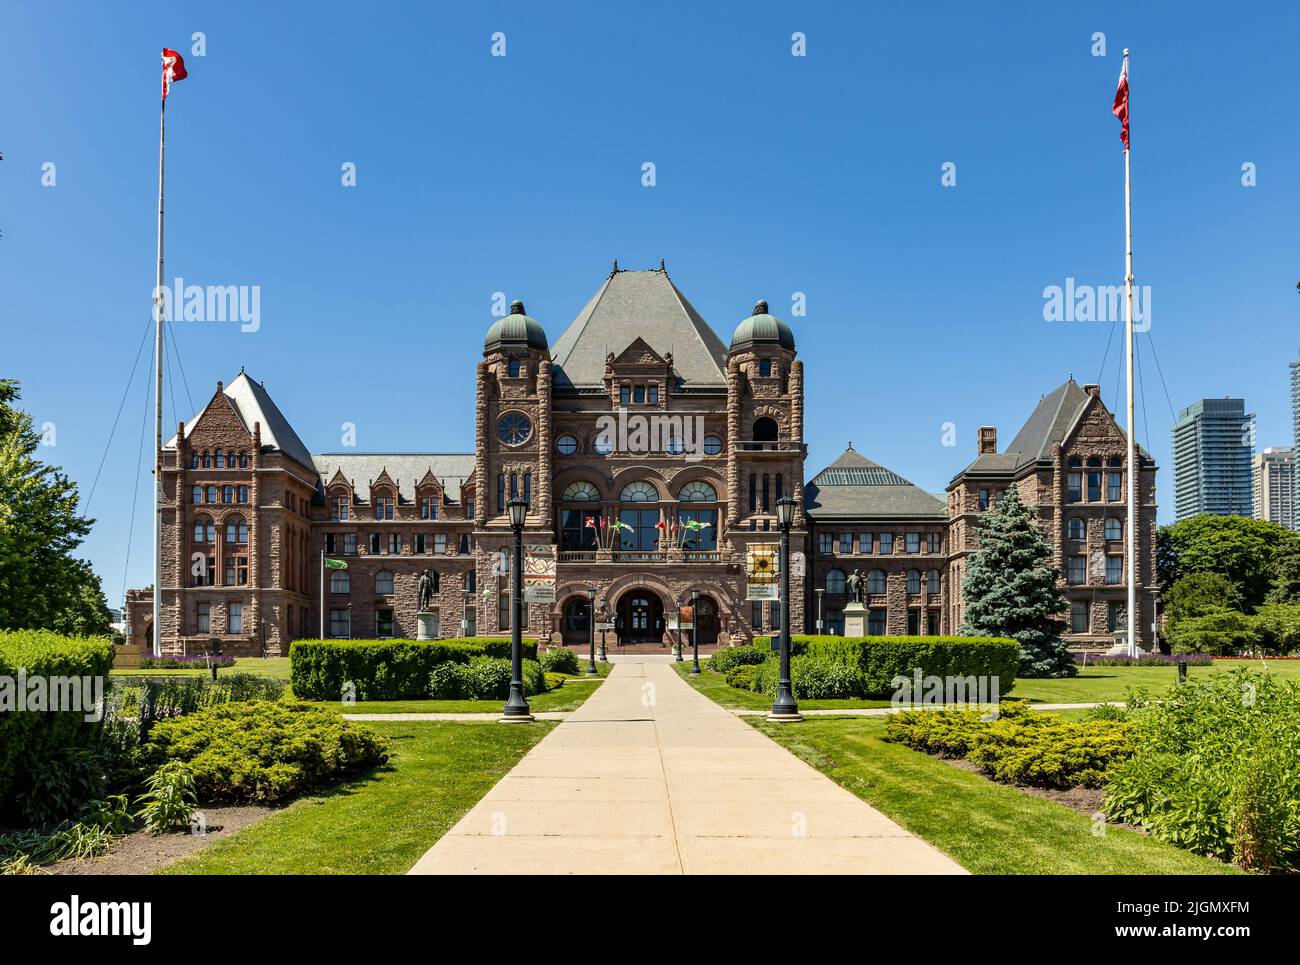 Legislative Assembly of Ontario (or in French 'Assemblée législative de l'Ontario') at Queens Park on a clear Summer day, Toronto, Canada. Stock Photo